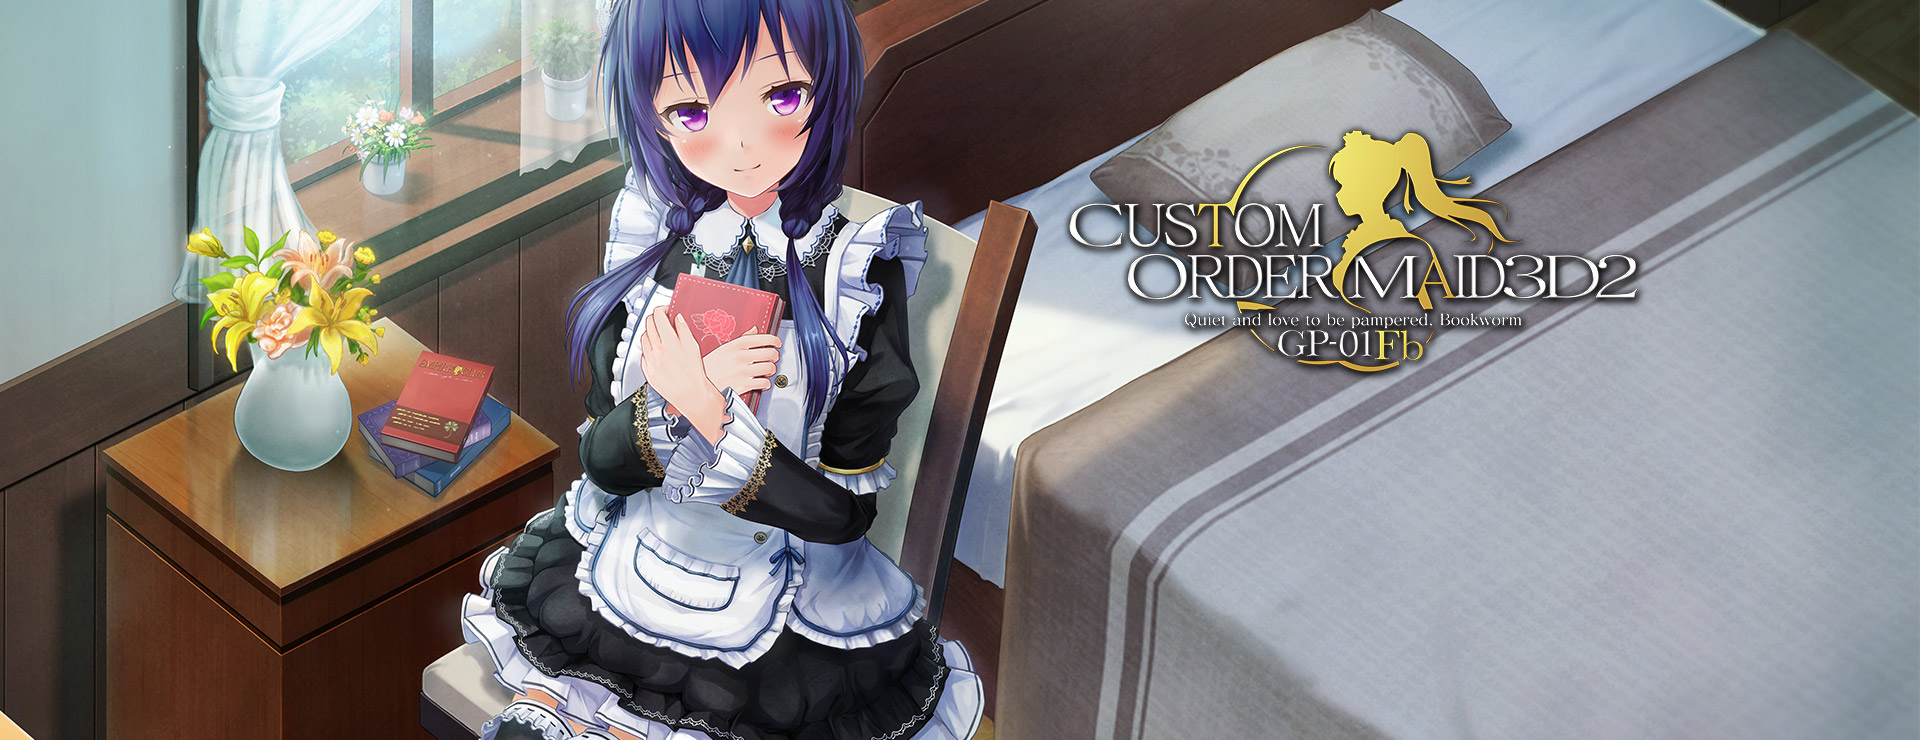 Custom Order Maid 3D2 - Quiet and love to be pampered Bookworm GP-01Fb DLC - 仿真游戏 遊戲